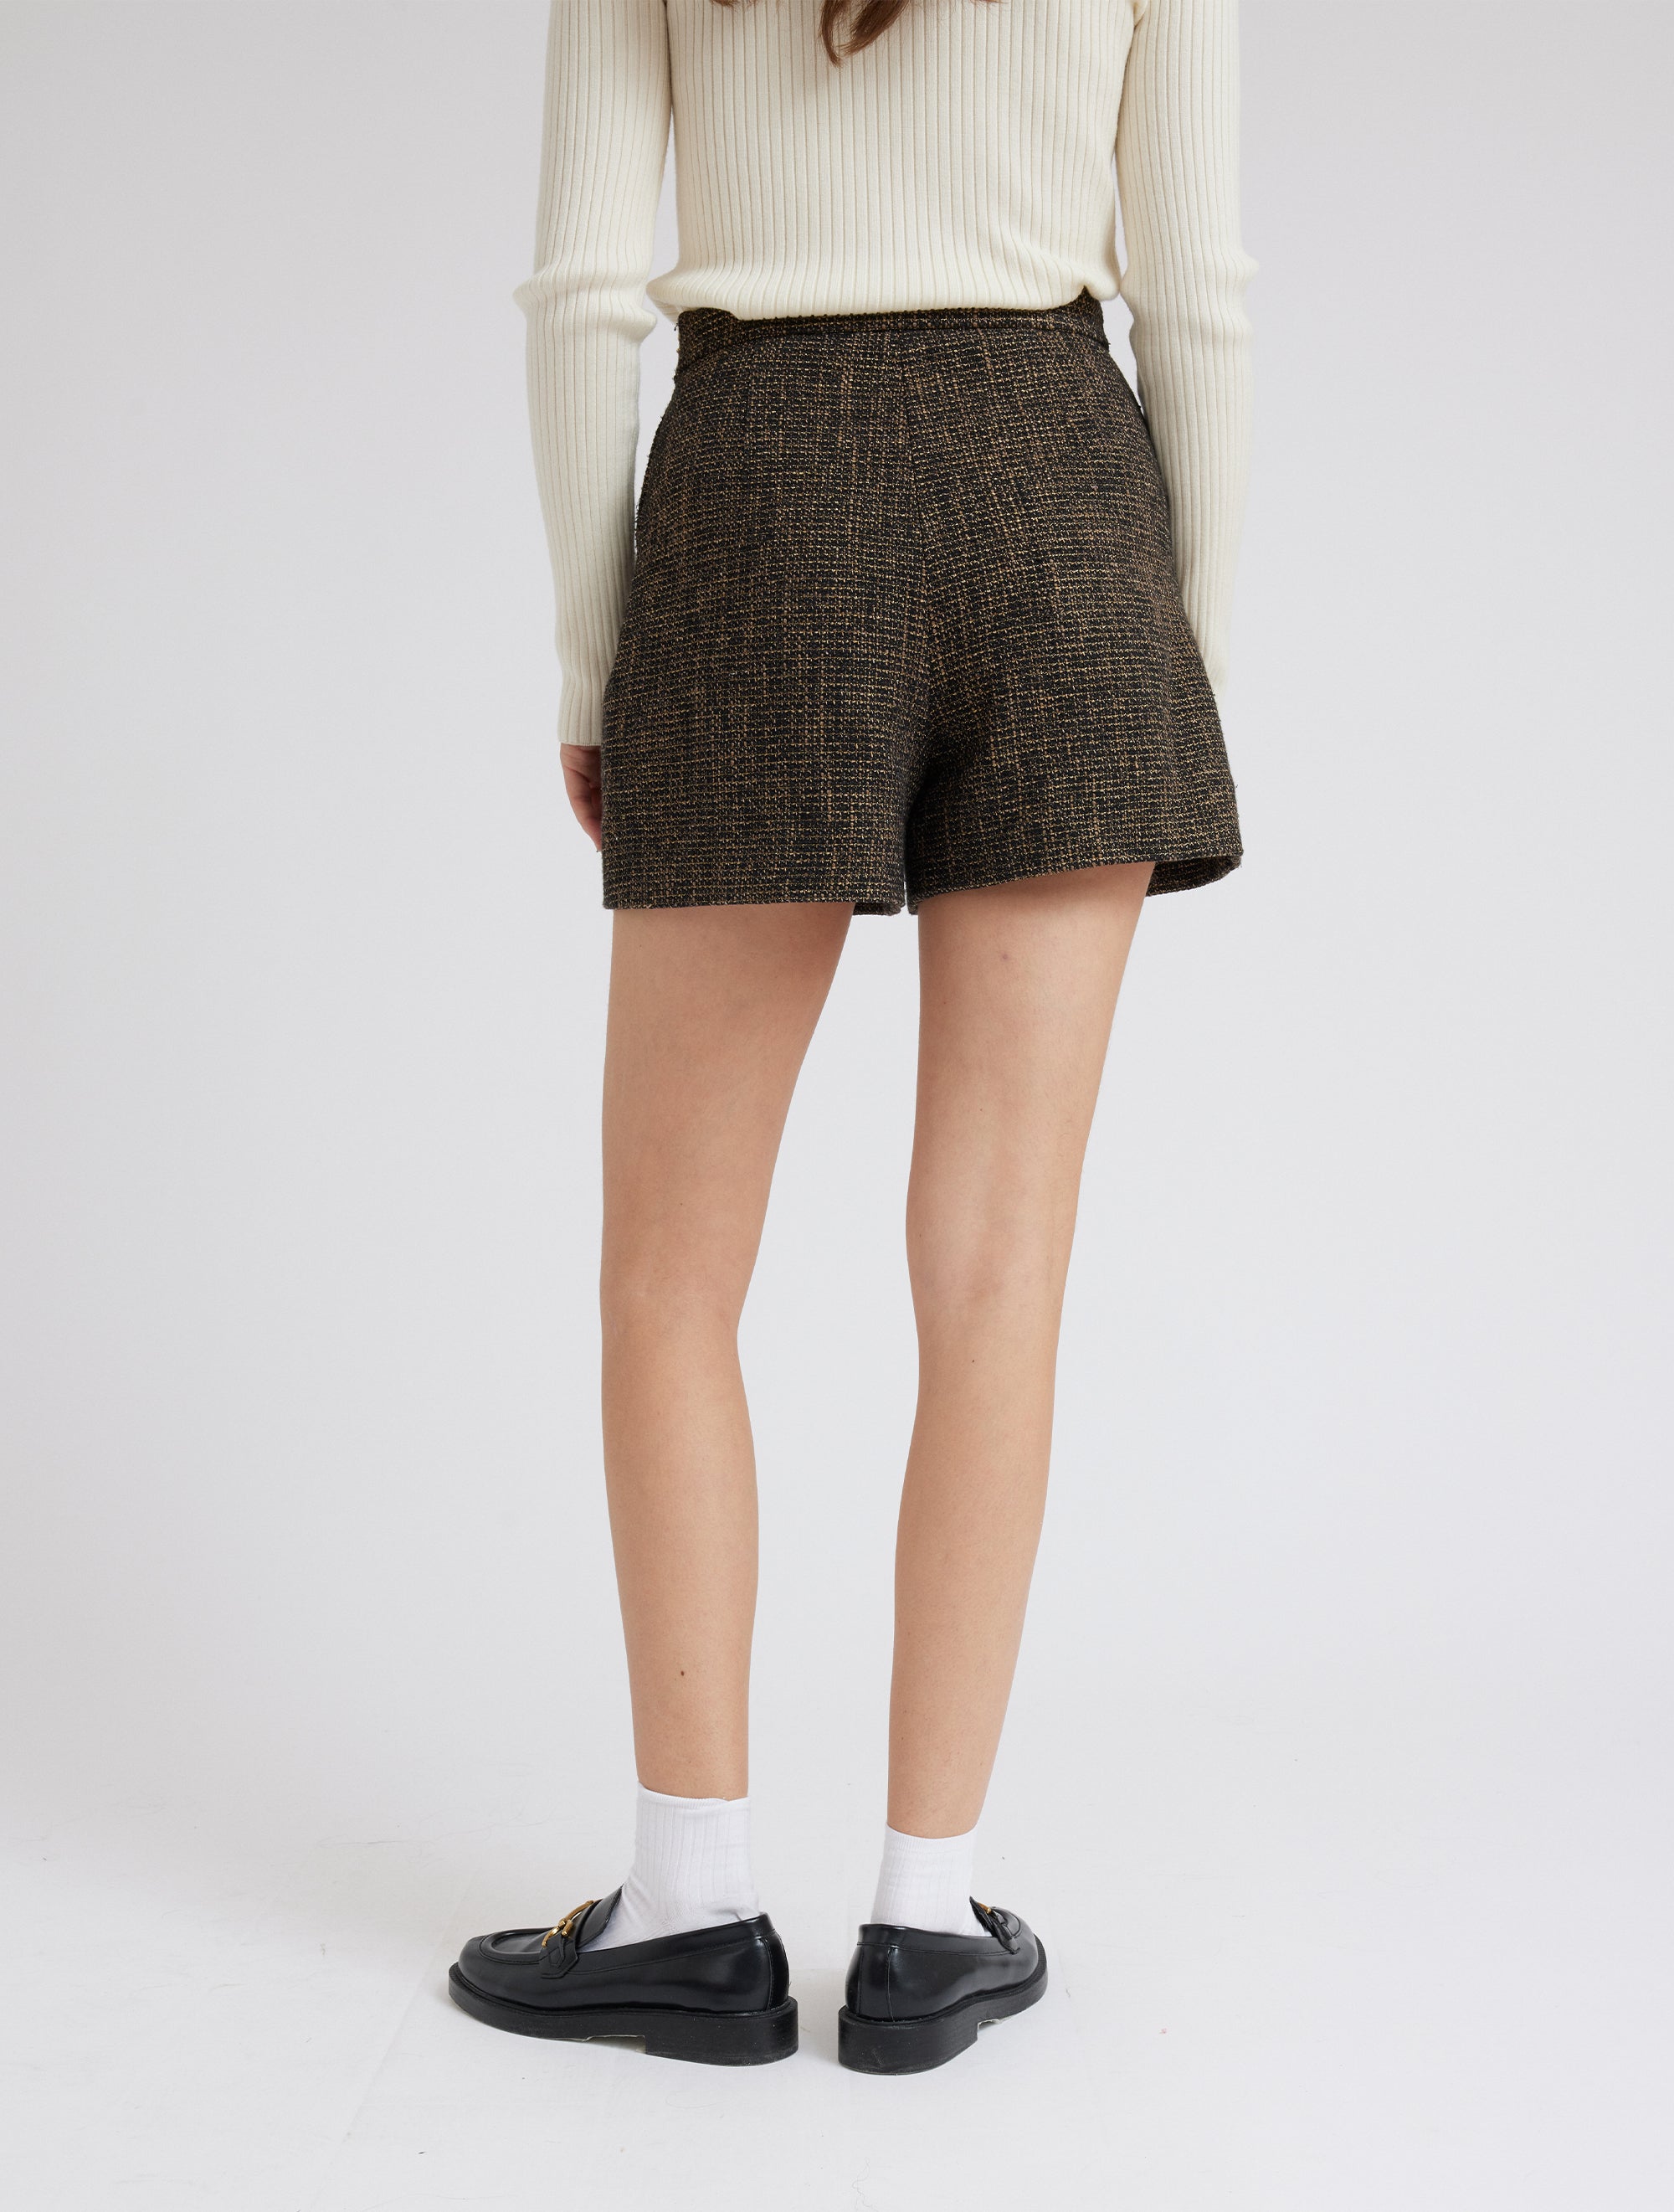 Black, taupe and gold thread boucle shorts with two feature buttons and slant side pockets